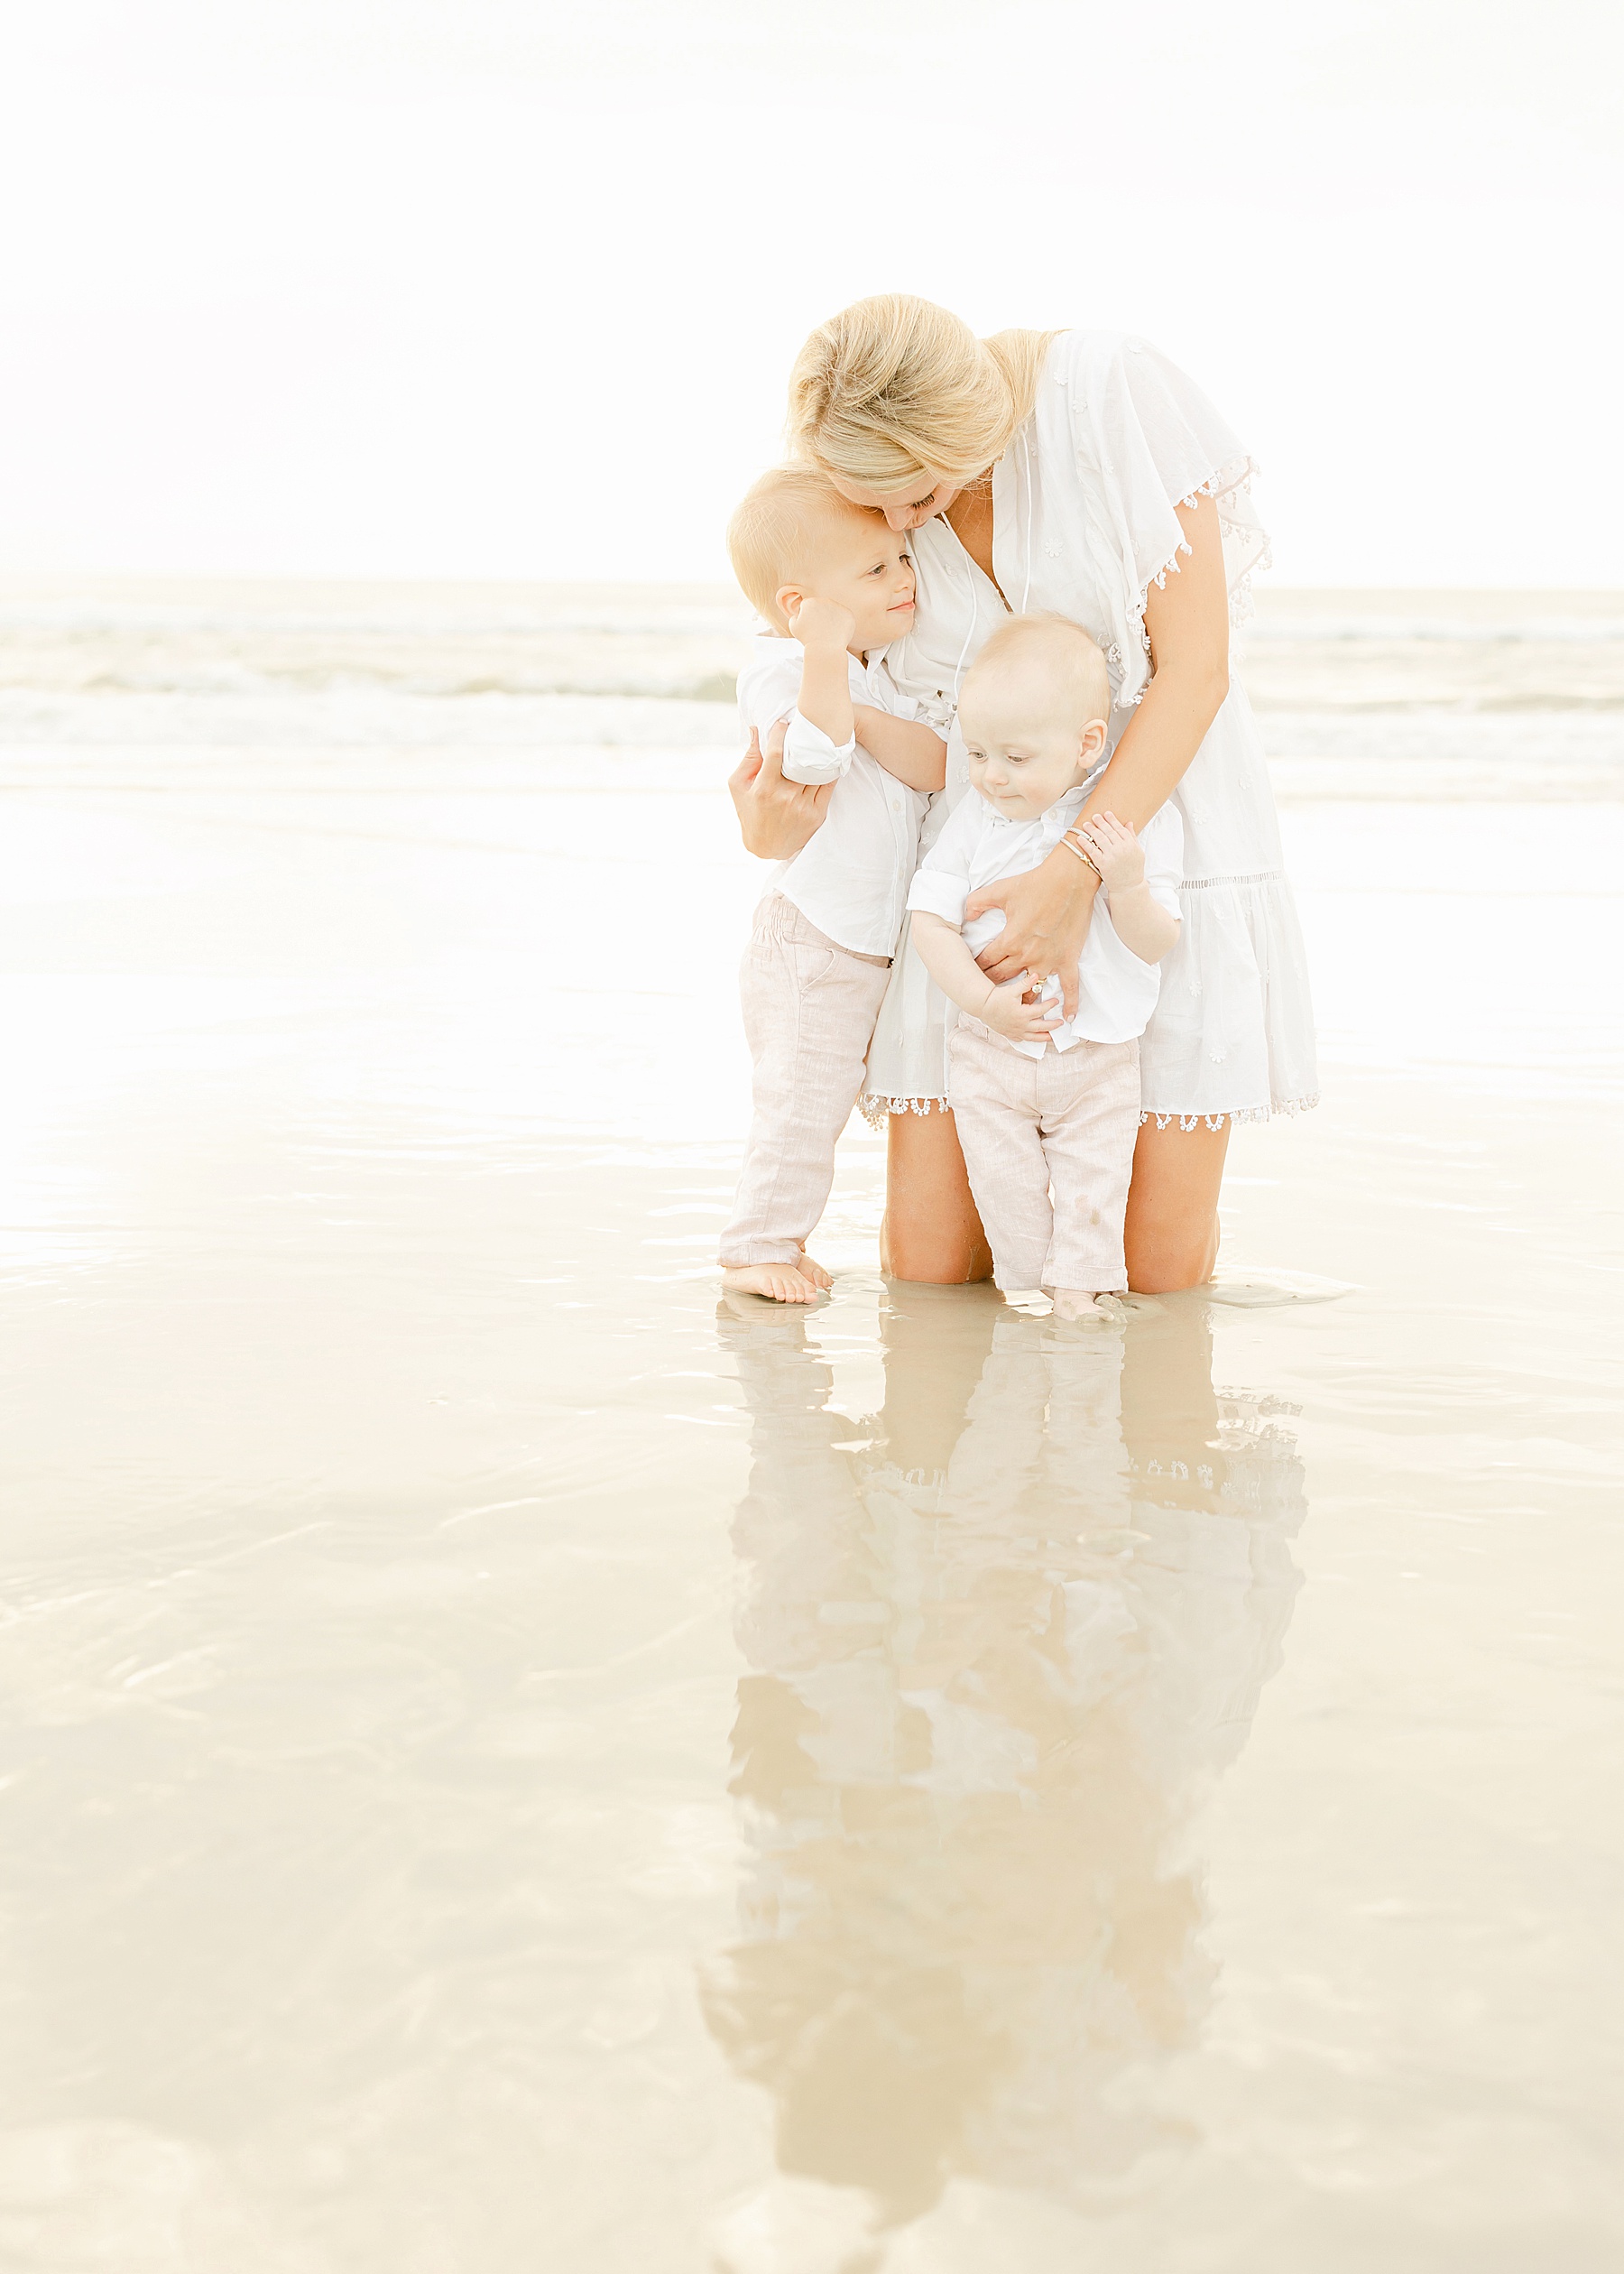 woman holding baby boys on the beach at sunrise wearing white dress in airy and soft lighting